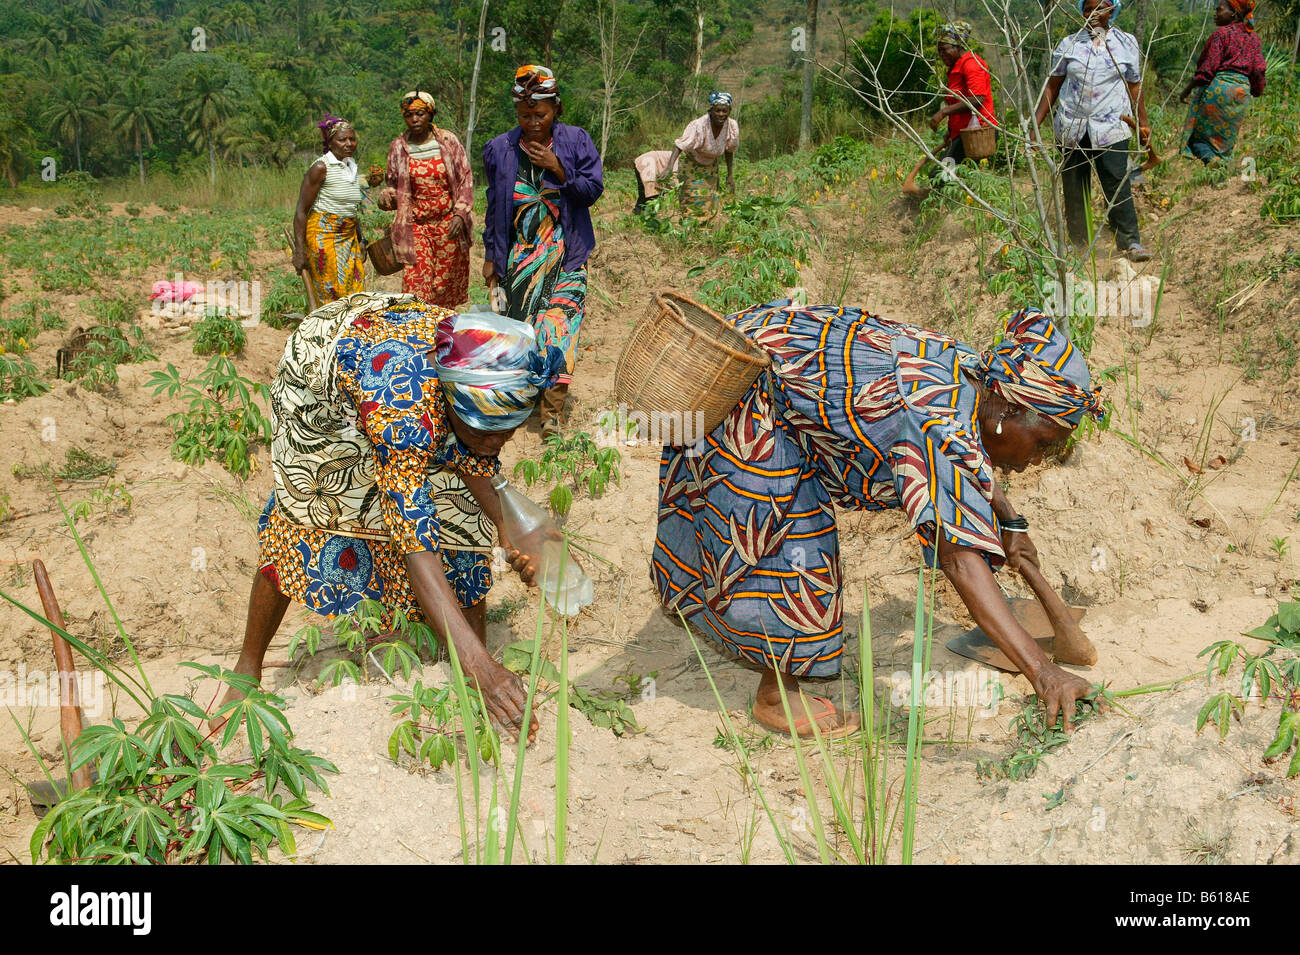 Women working in a field, Njindom, Cameroon, Africa Stock Photo